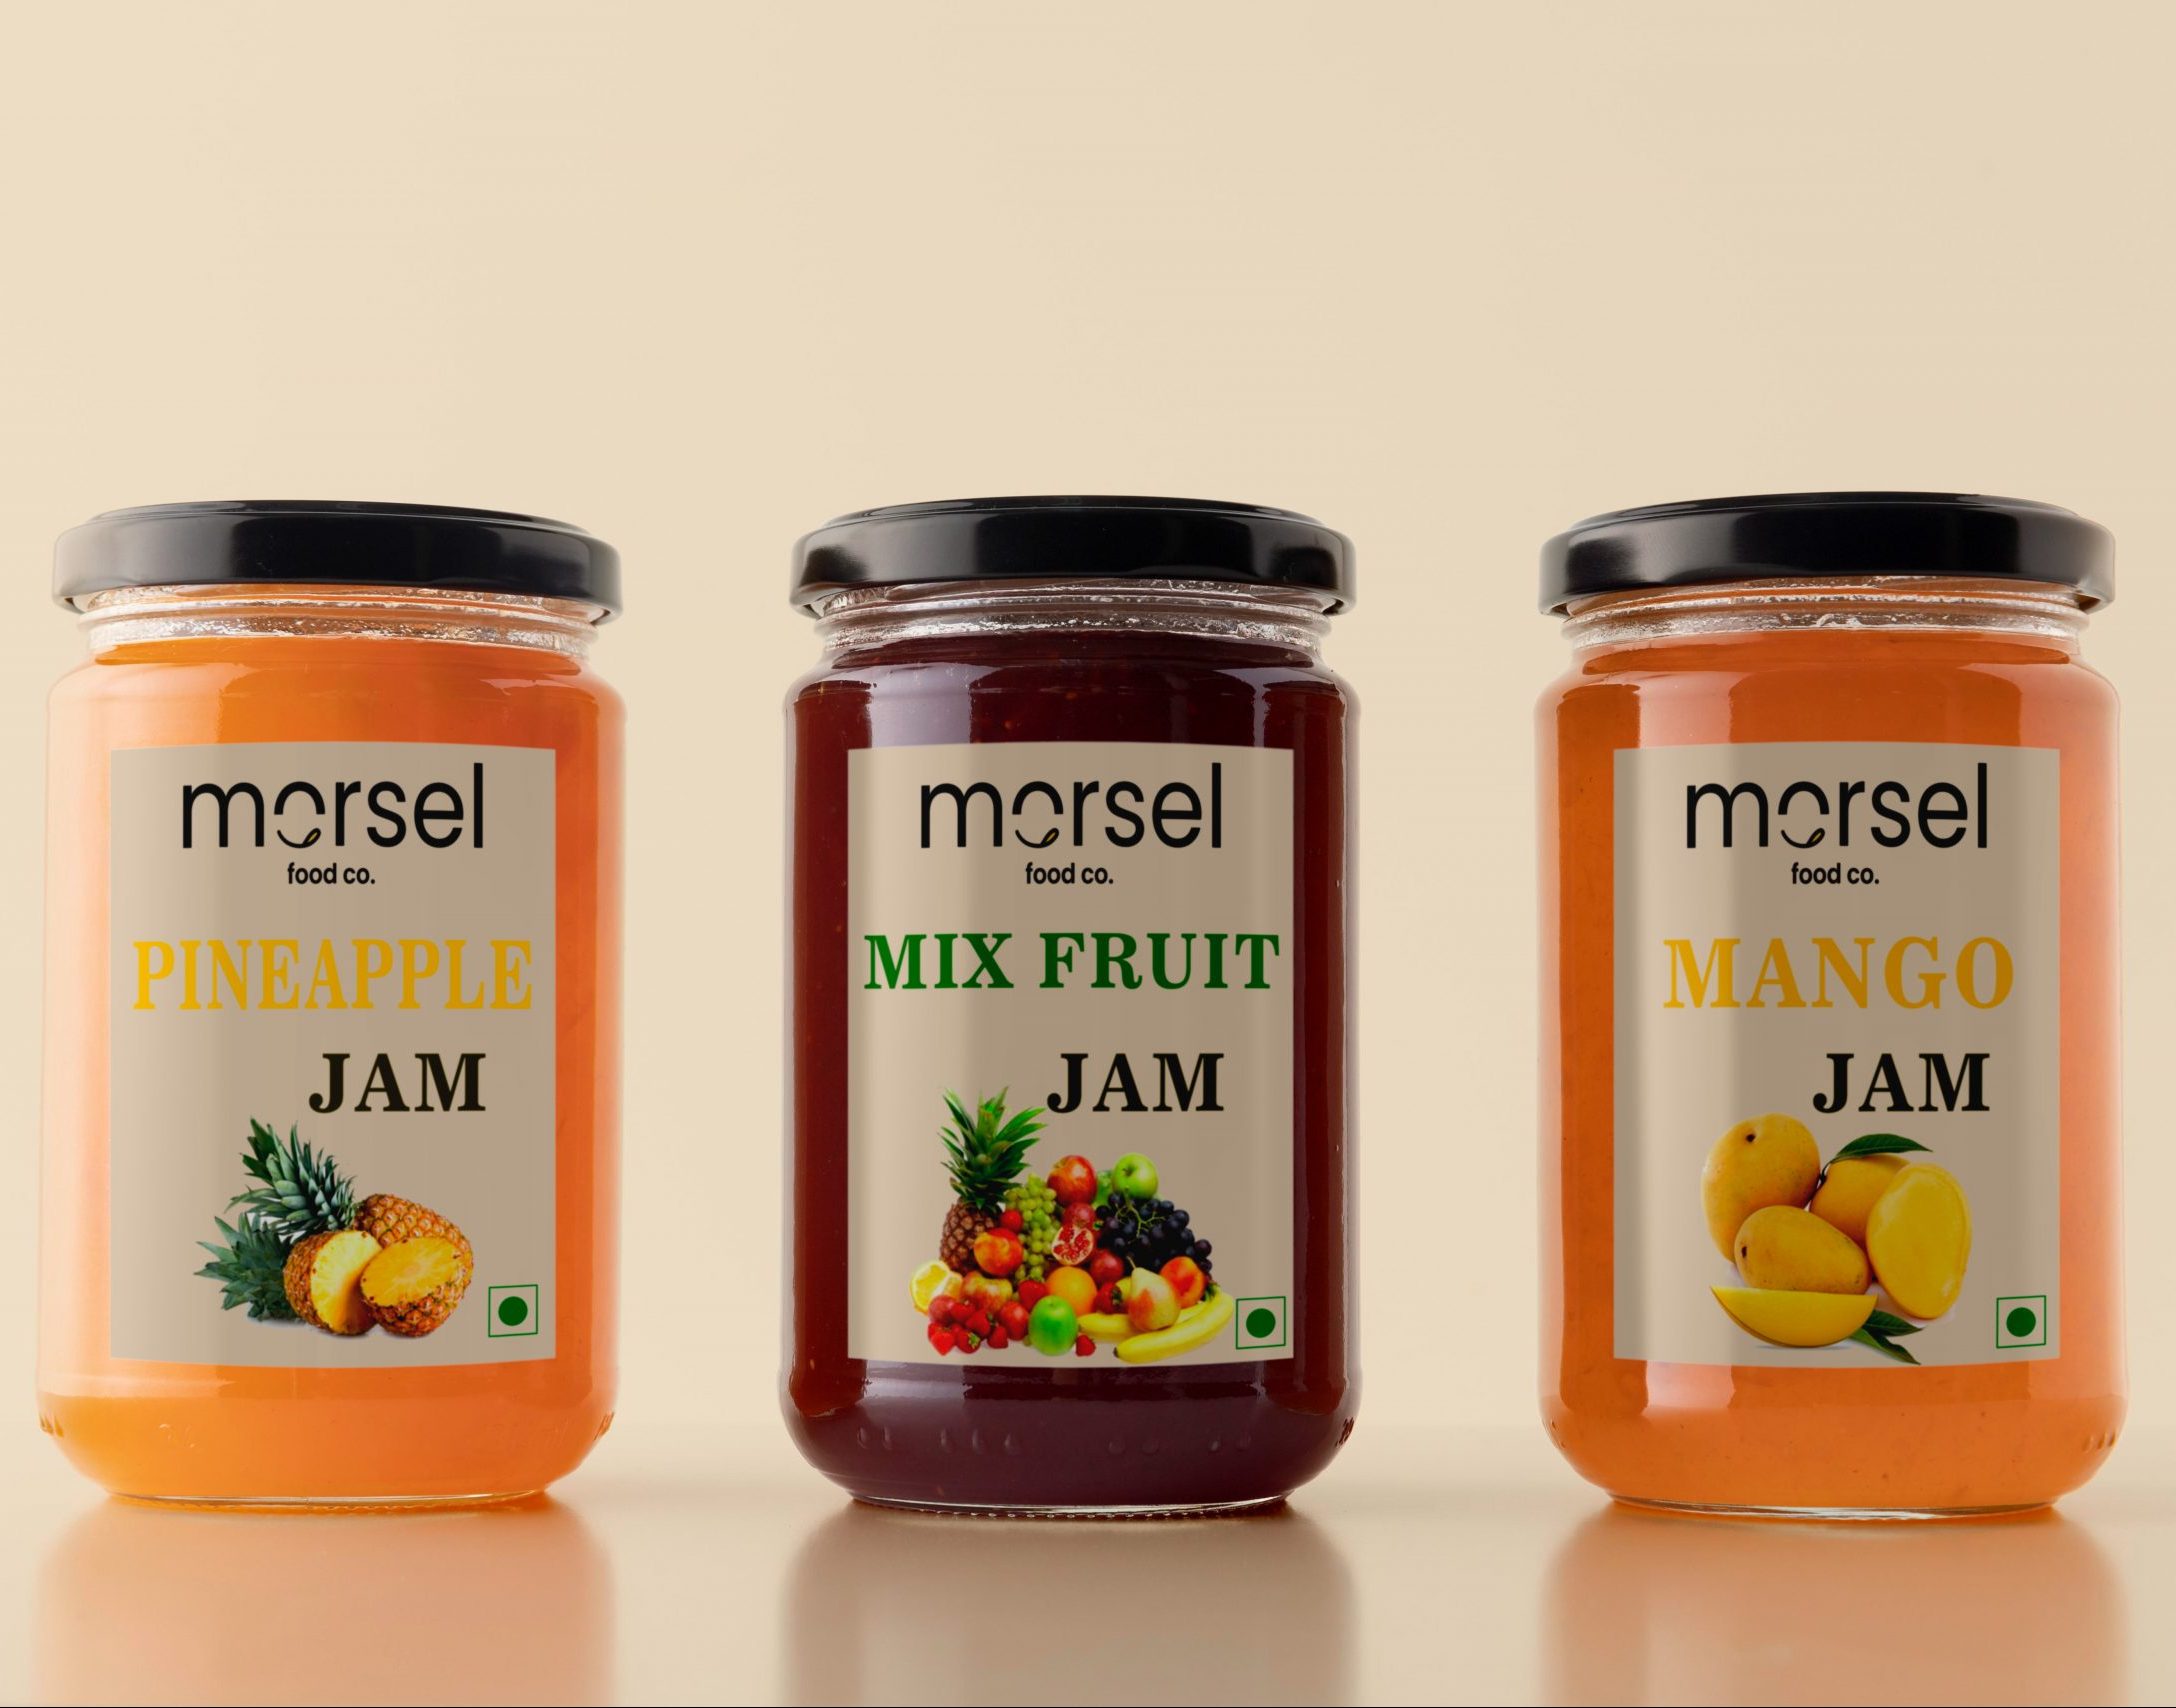 Jams by Morsel Food Co.